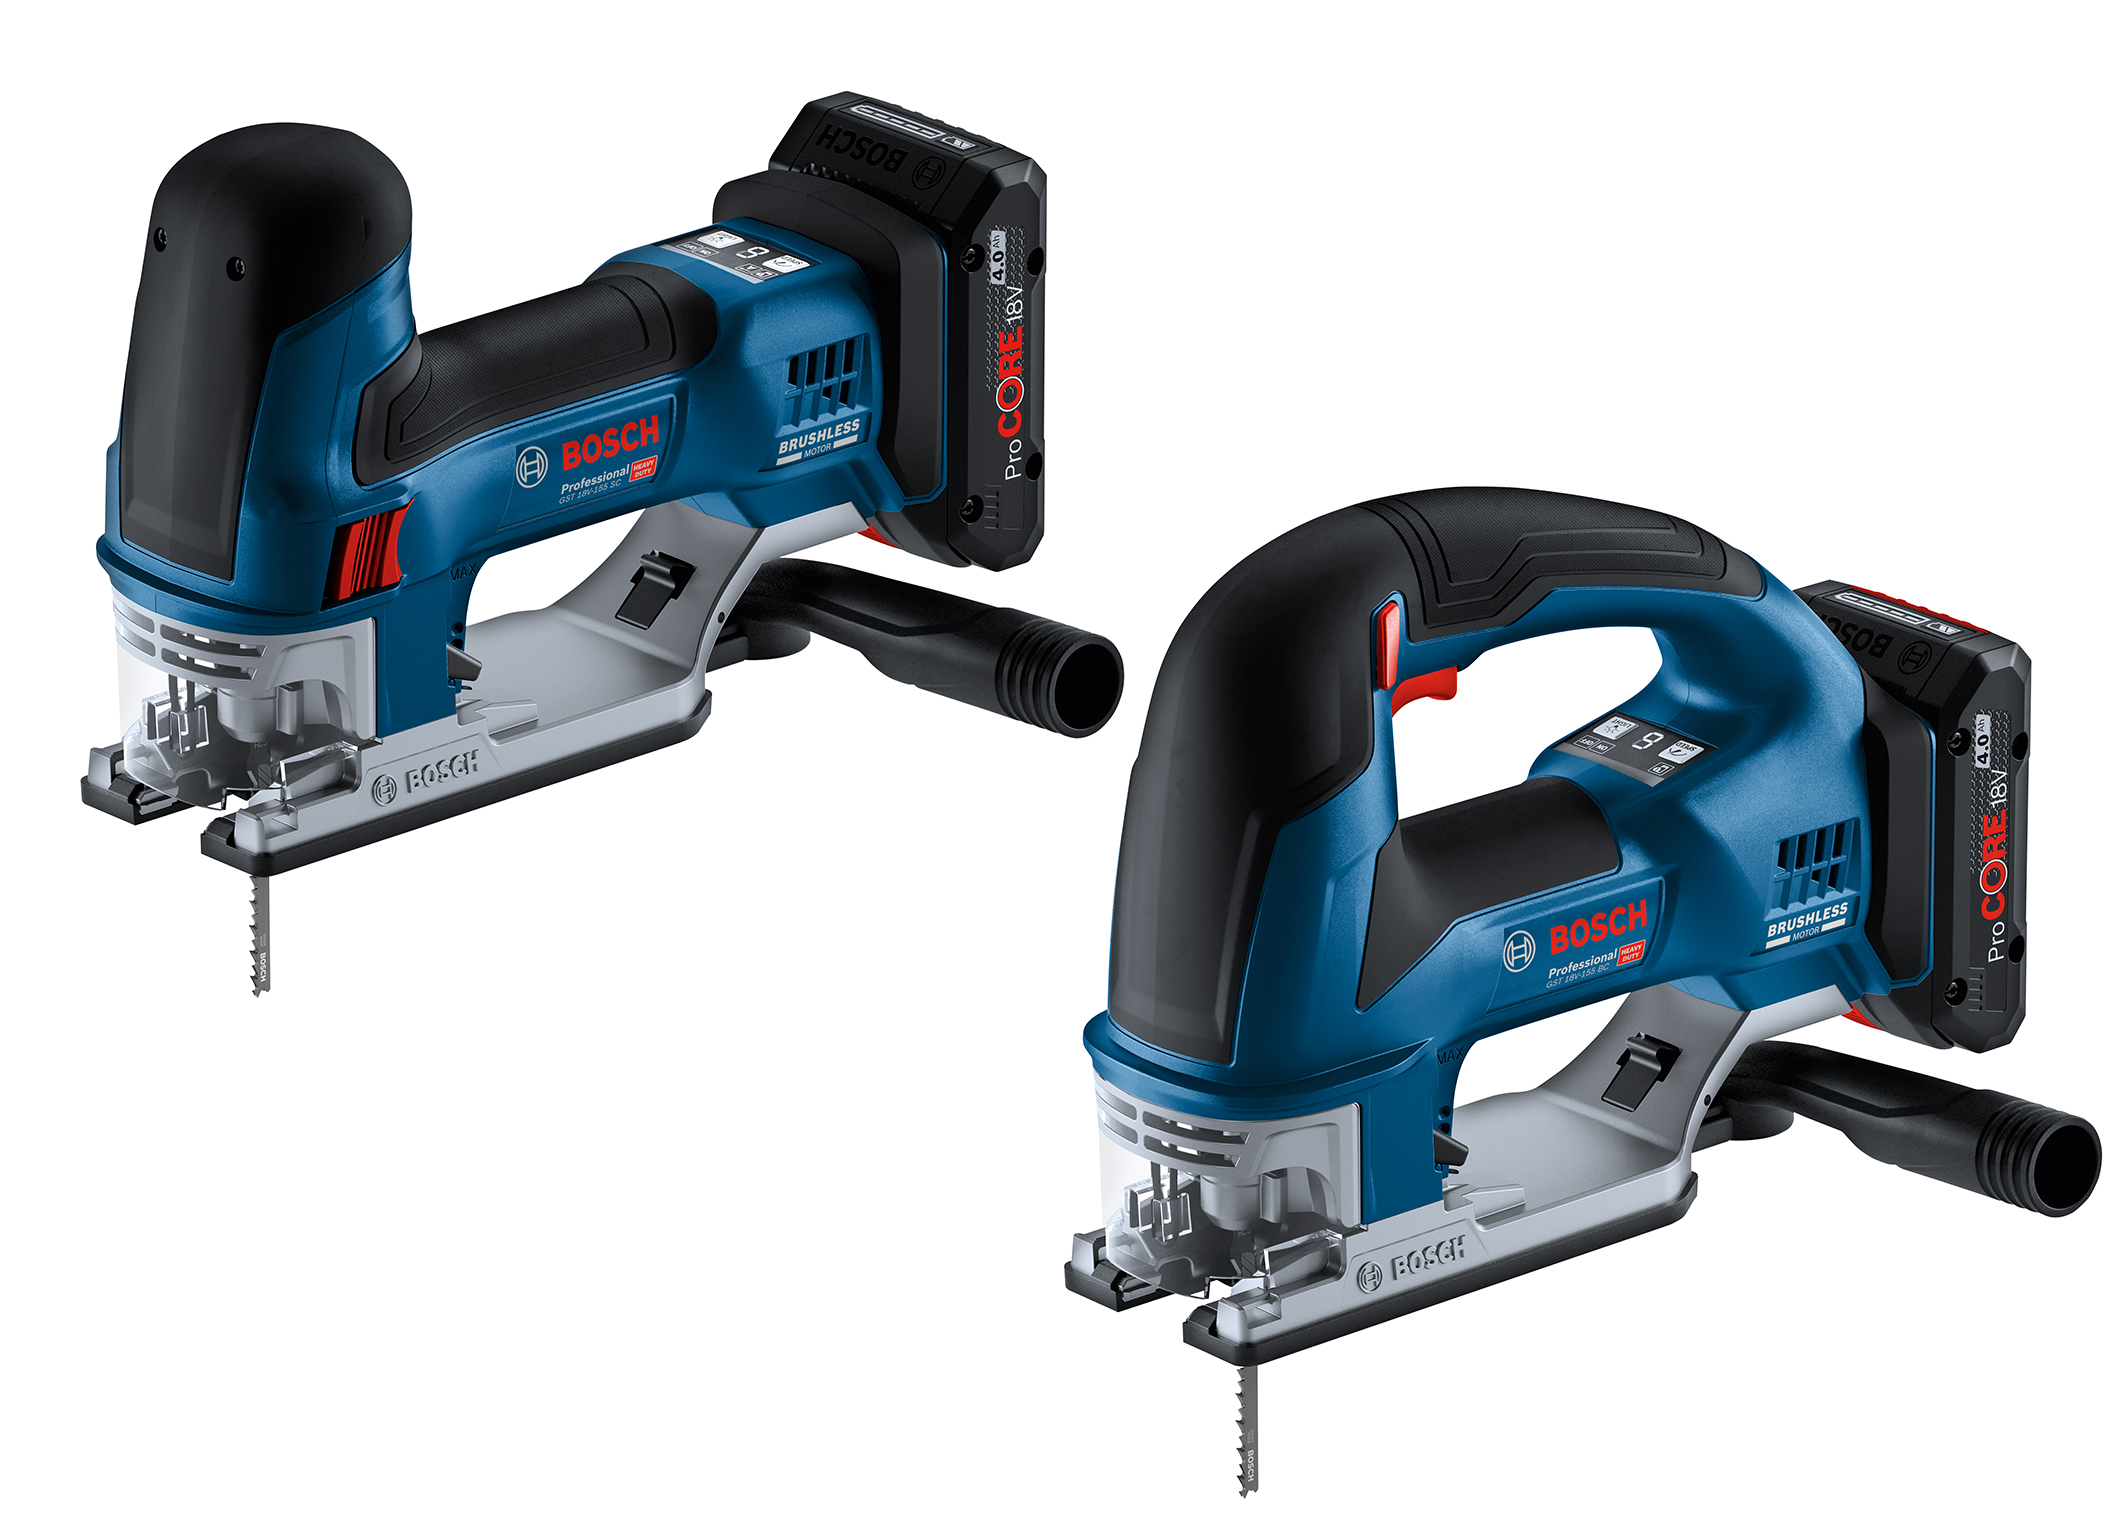 Expansion of the Professional 18V System: New cordless jigsaws from Bosch for professionals